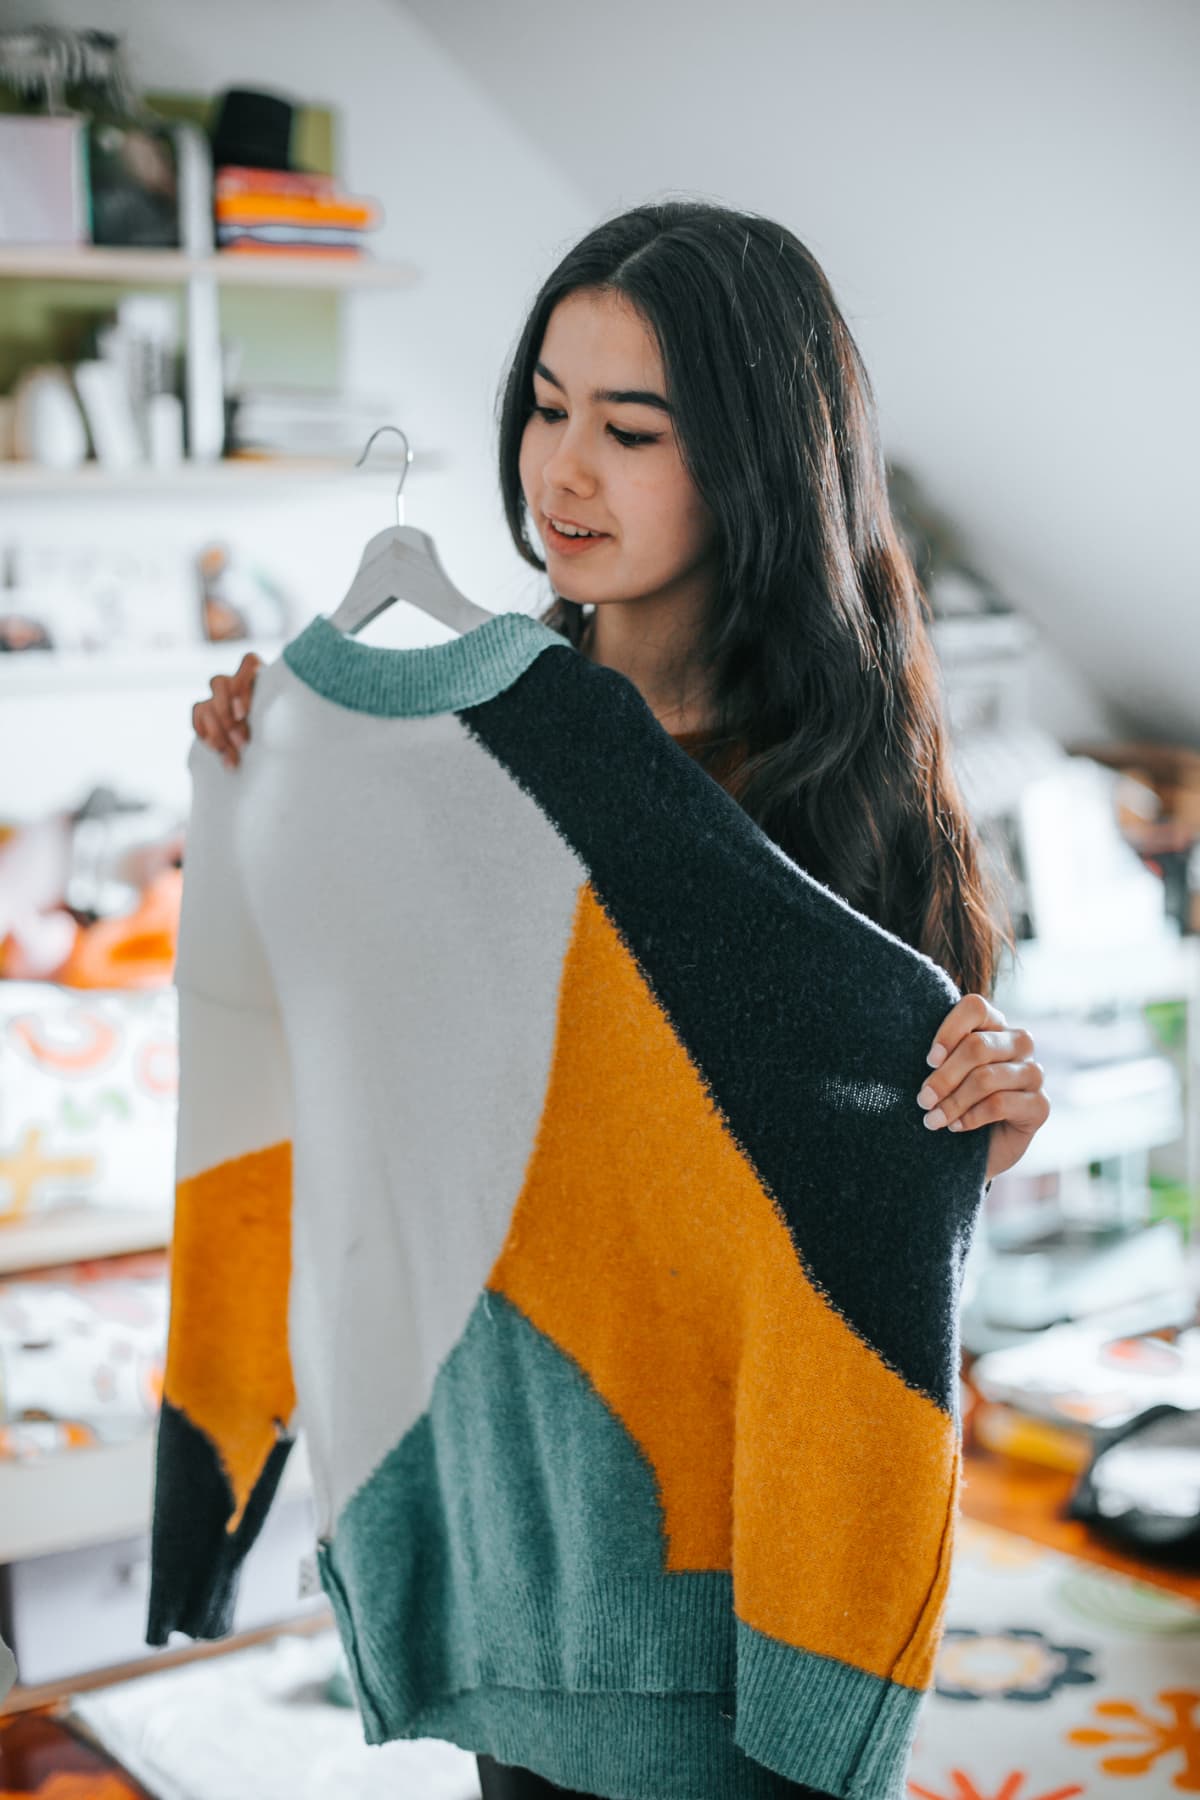 young woman choosing a sweater from her closet